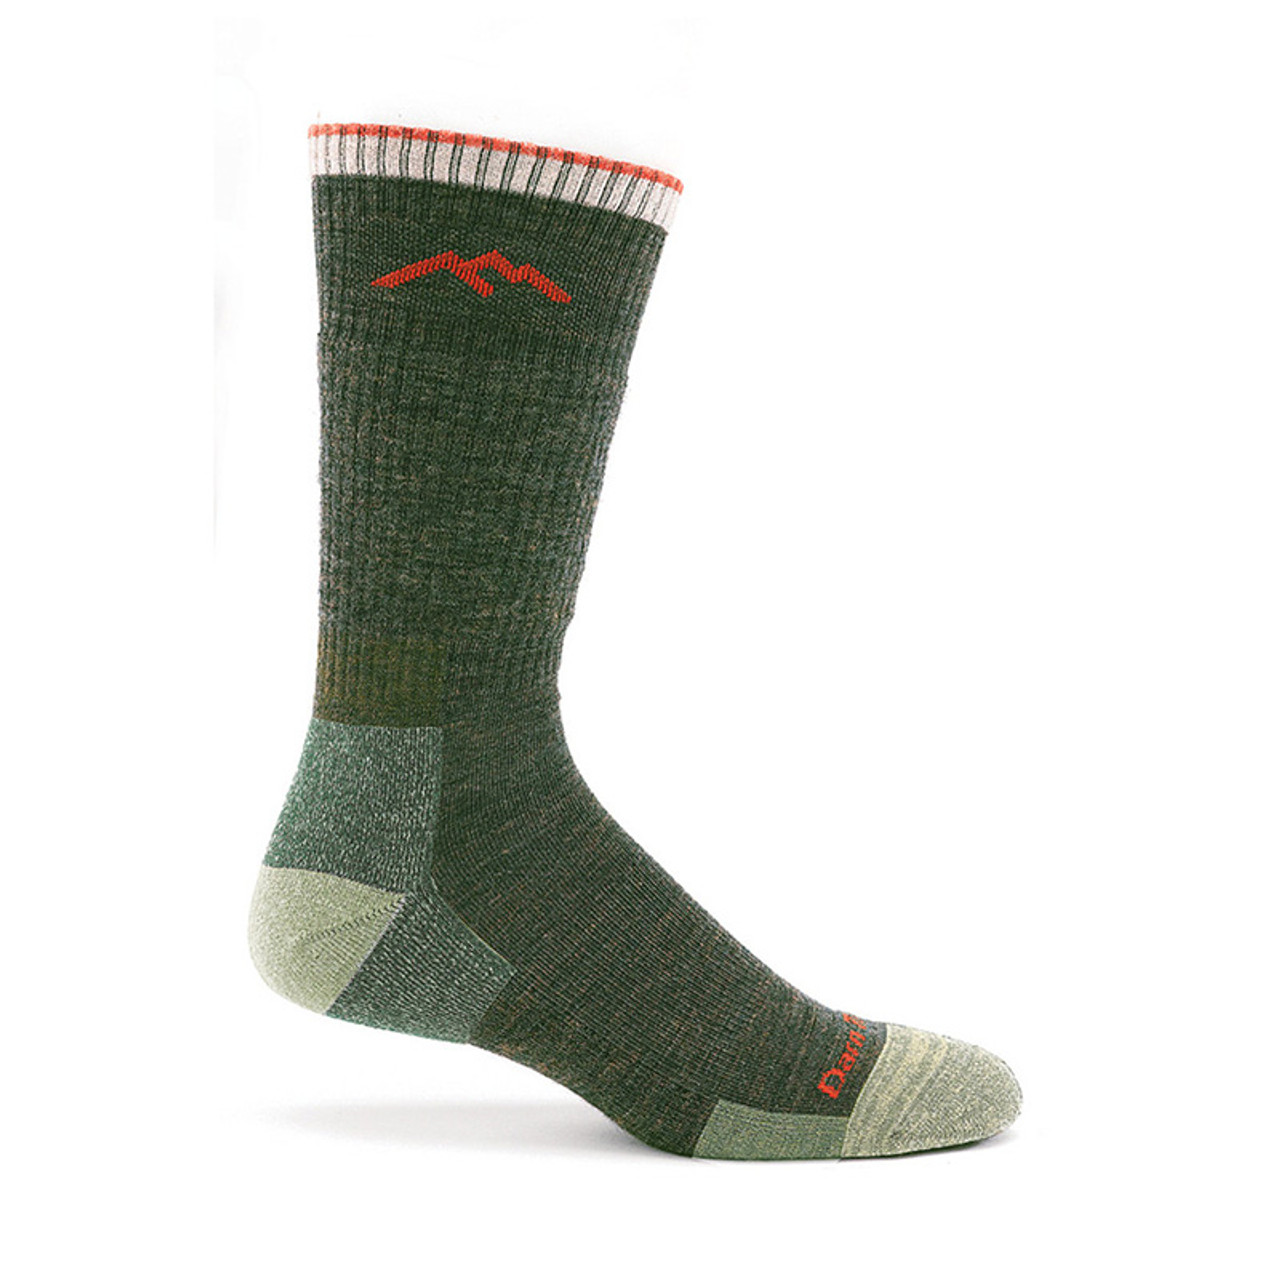 Still Made in Vermont, USA - Socks Made in the USA – Darn Tough